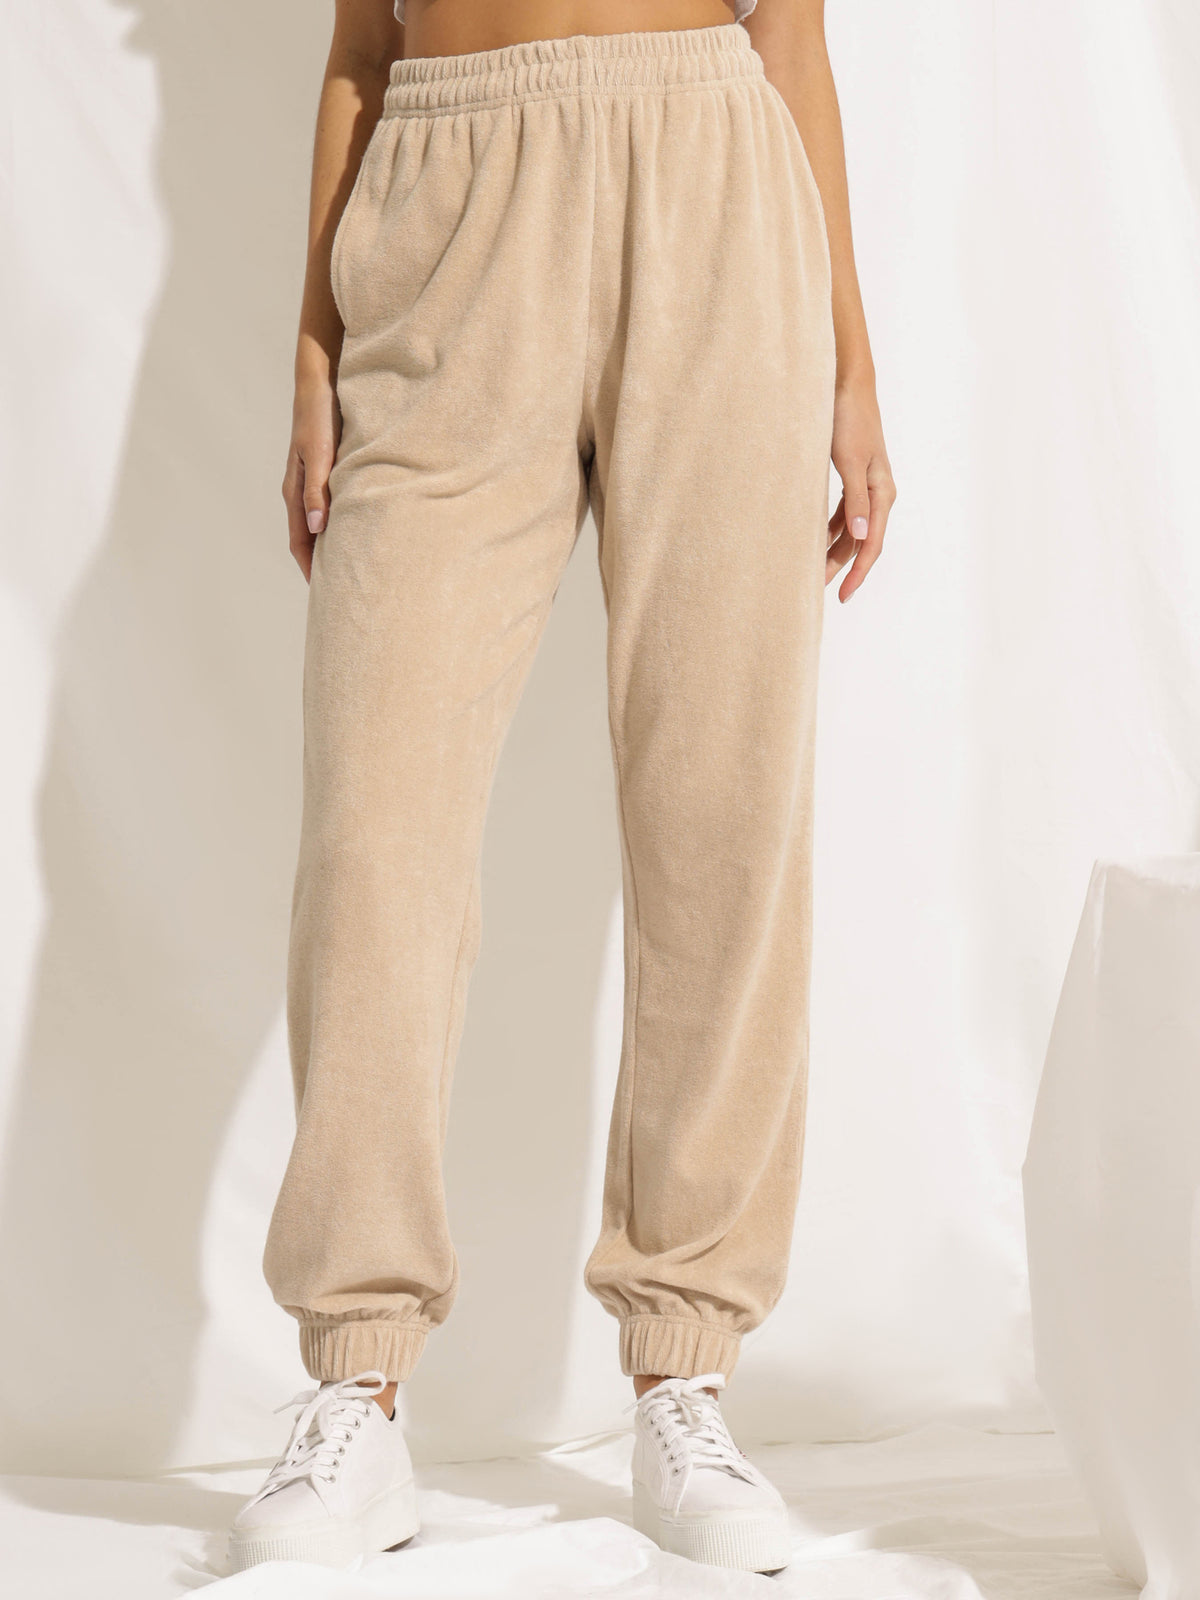 Tait Trackpants in Oyster White